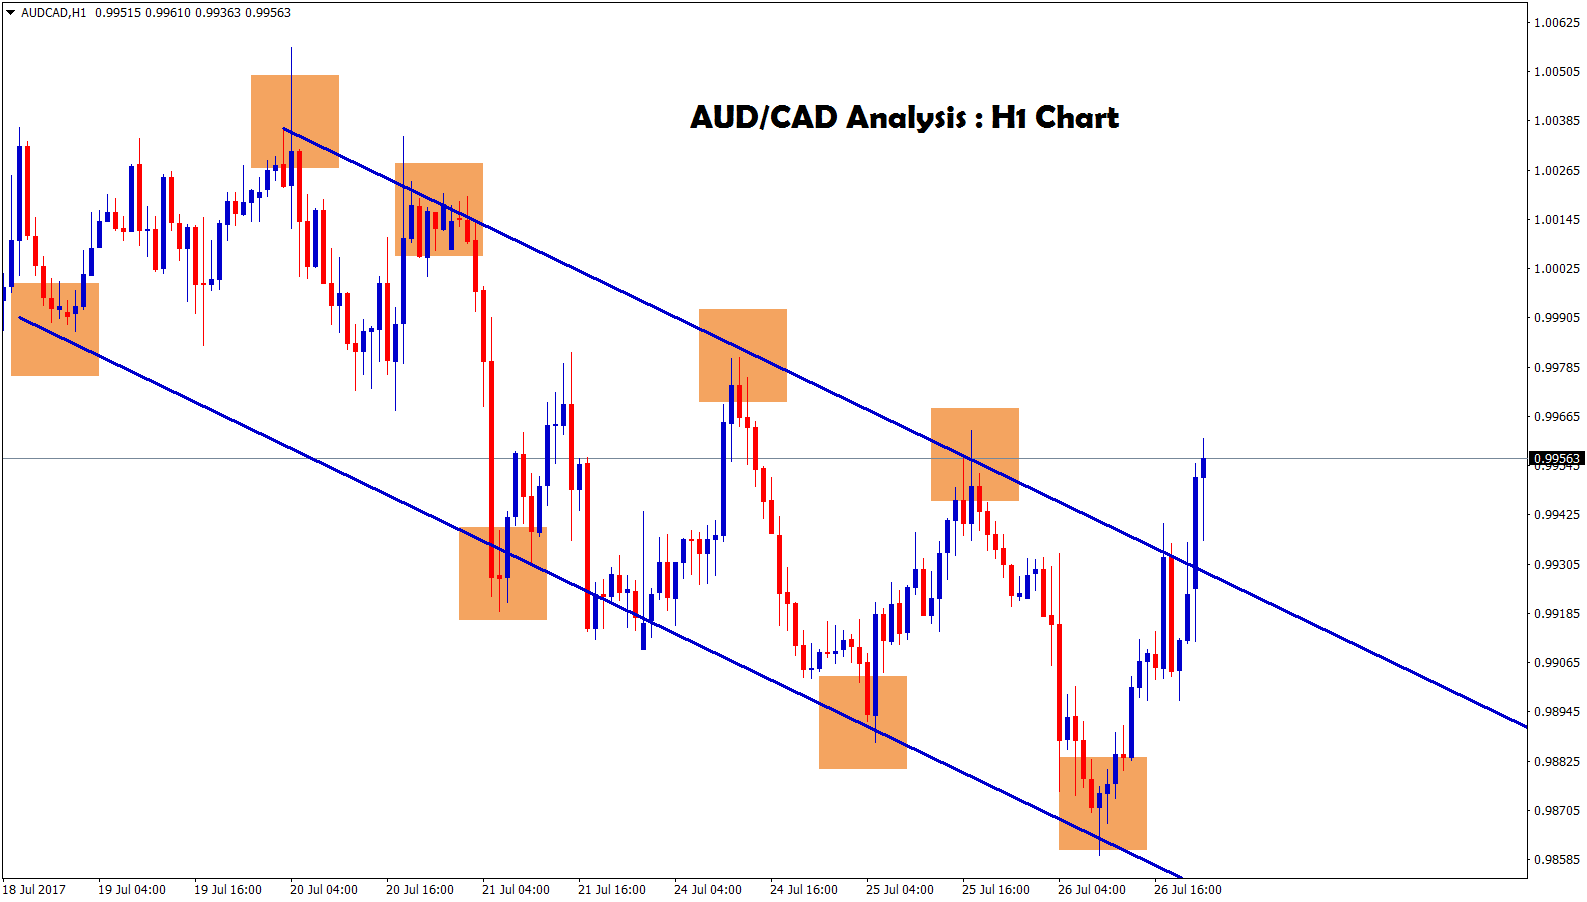 trend line breakout in AUDCAD hourly chart